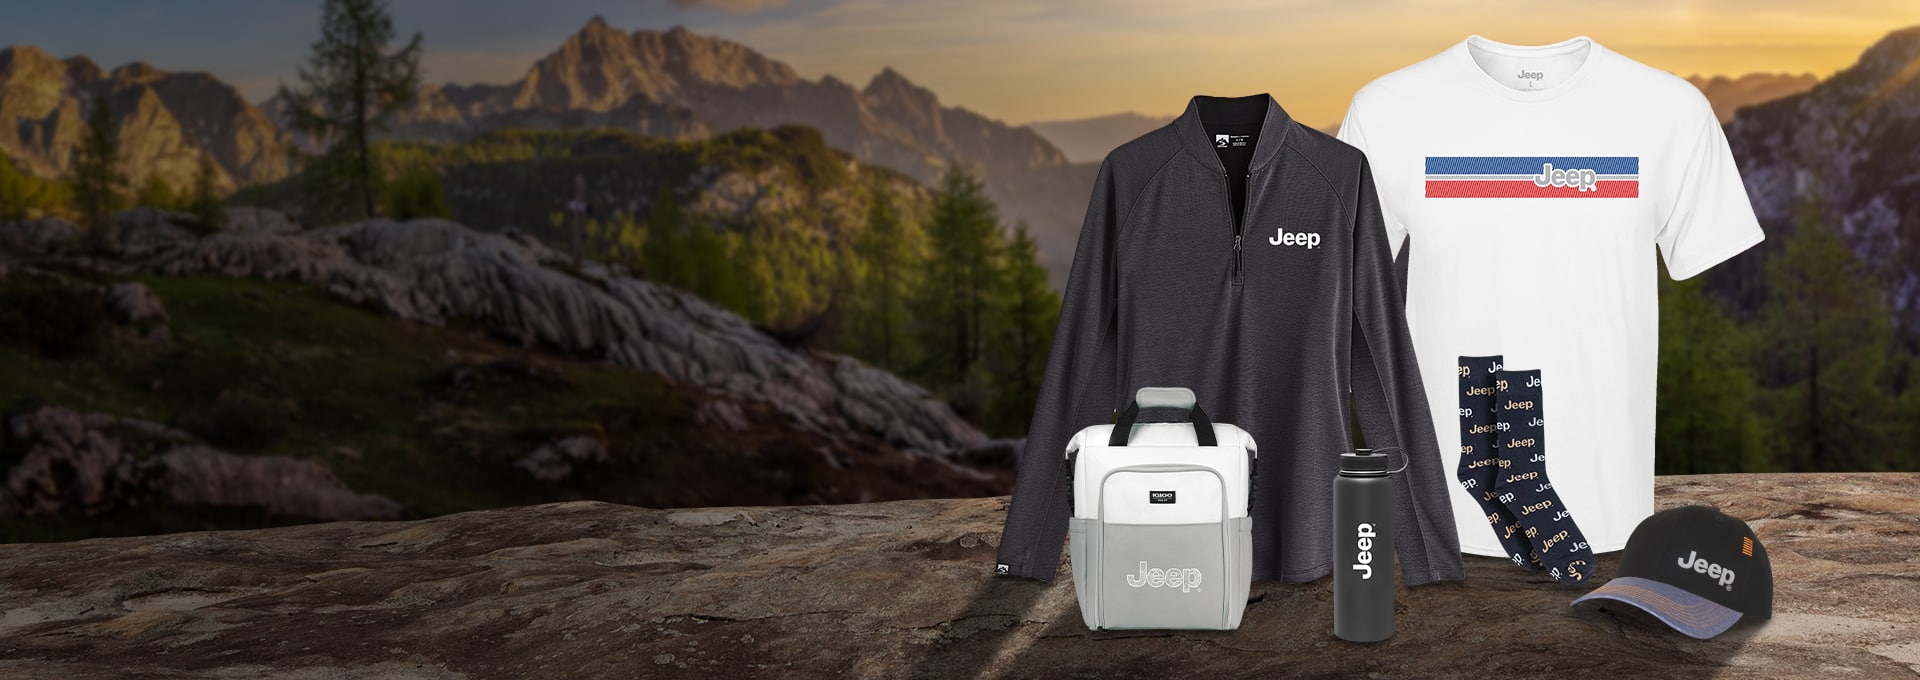 A set of Jeep Brand merchandise including a women's gray Renewer Quarter Zip Pullover, a men's white Jeep Patriotic T-Shirt, a gray and white Jeep Igloo Seadrift Backpack Cooler, a black Jeep Stainless Steel Water Bottle, black Jeep men't dress socks and a black and gray Jeep Structured Cap with Orange Stitching.